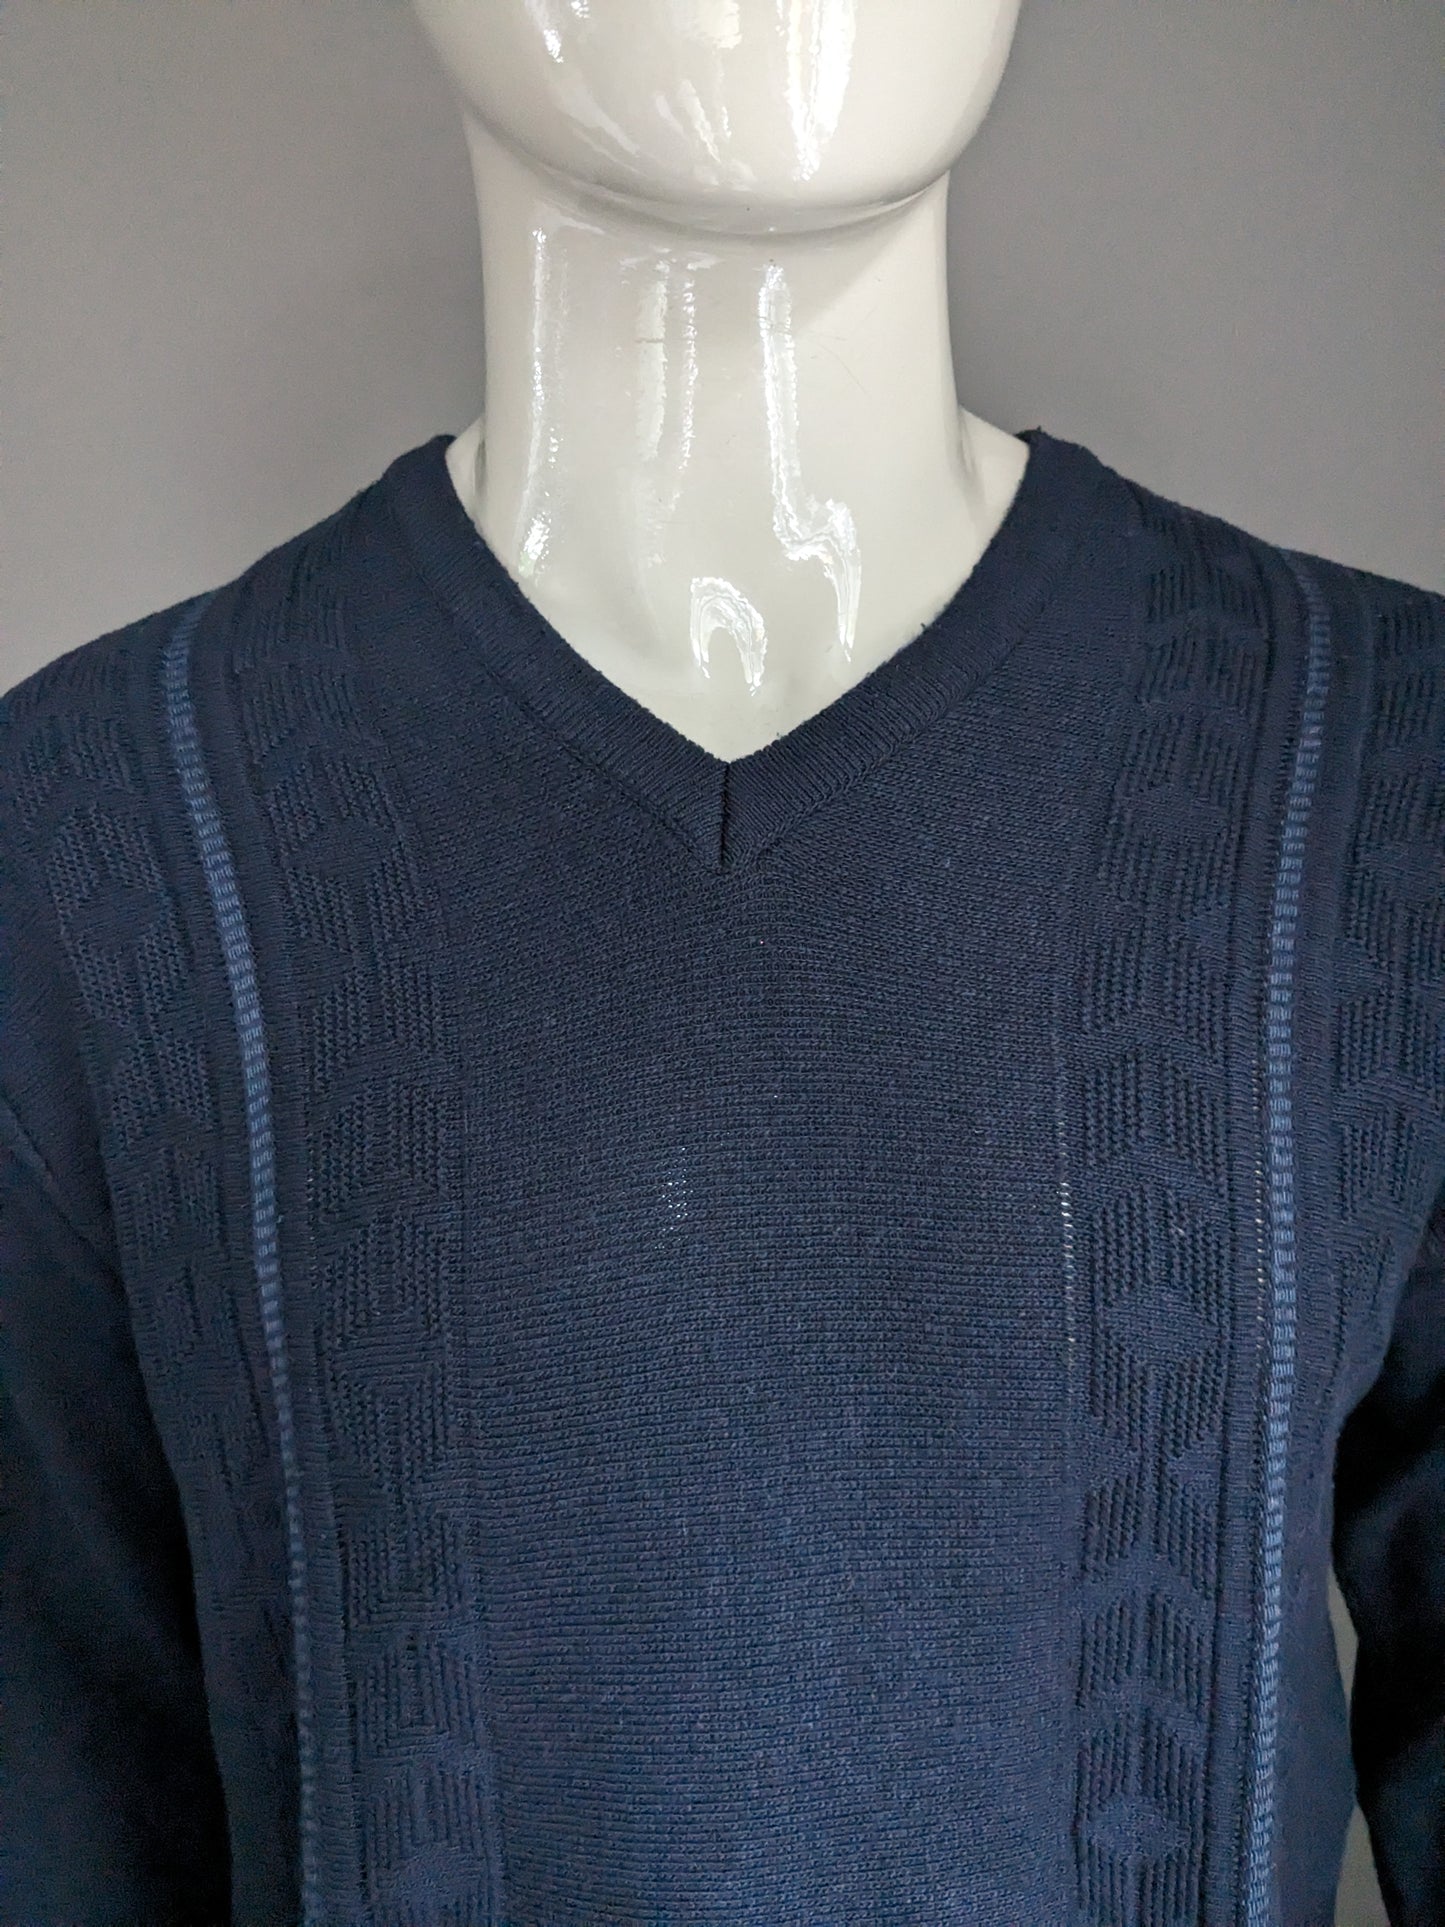 Vintage look Dunnes cable sweater. Dark blue colored. Size M.